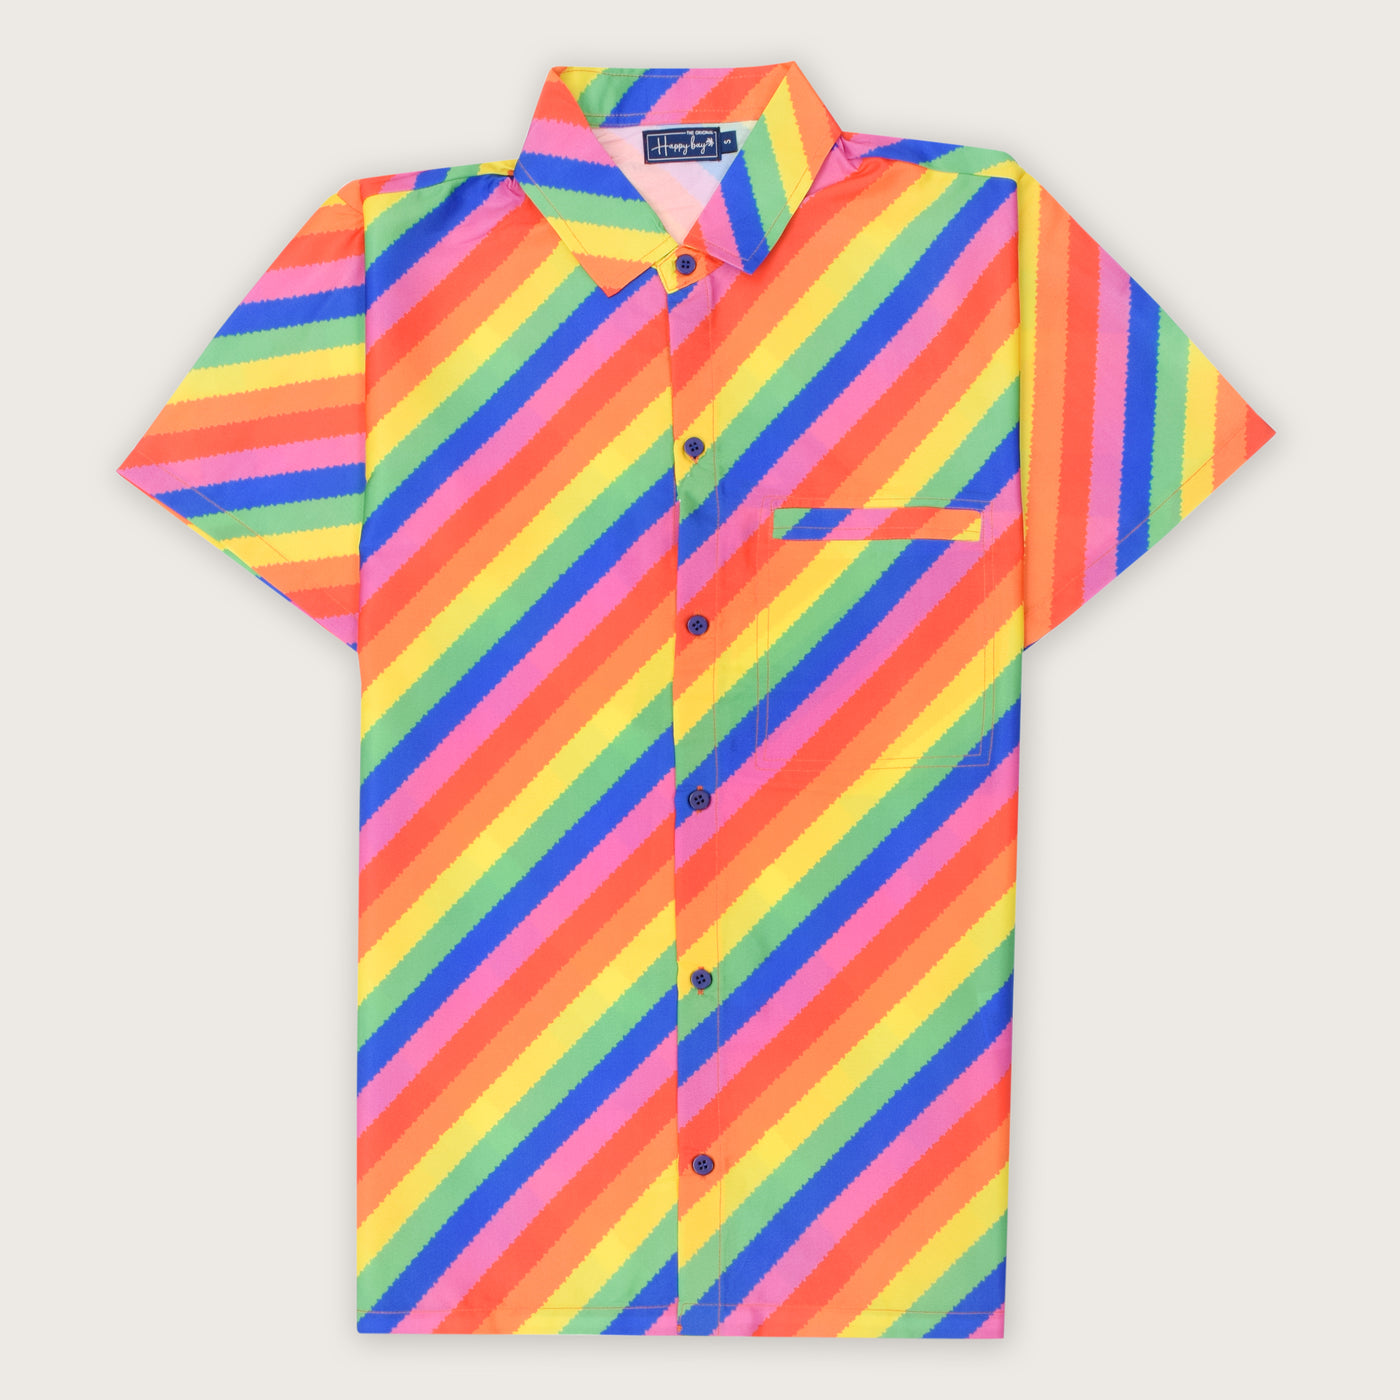 Buy now pride collection shirt